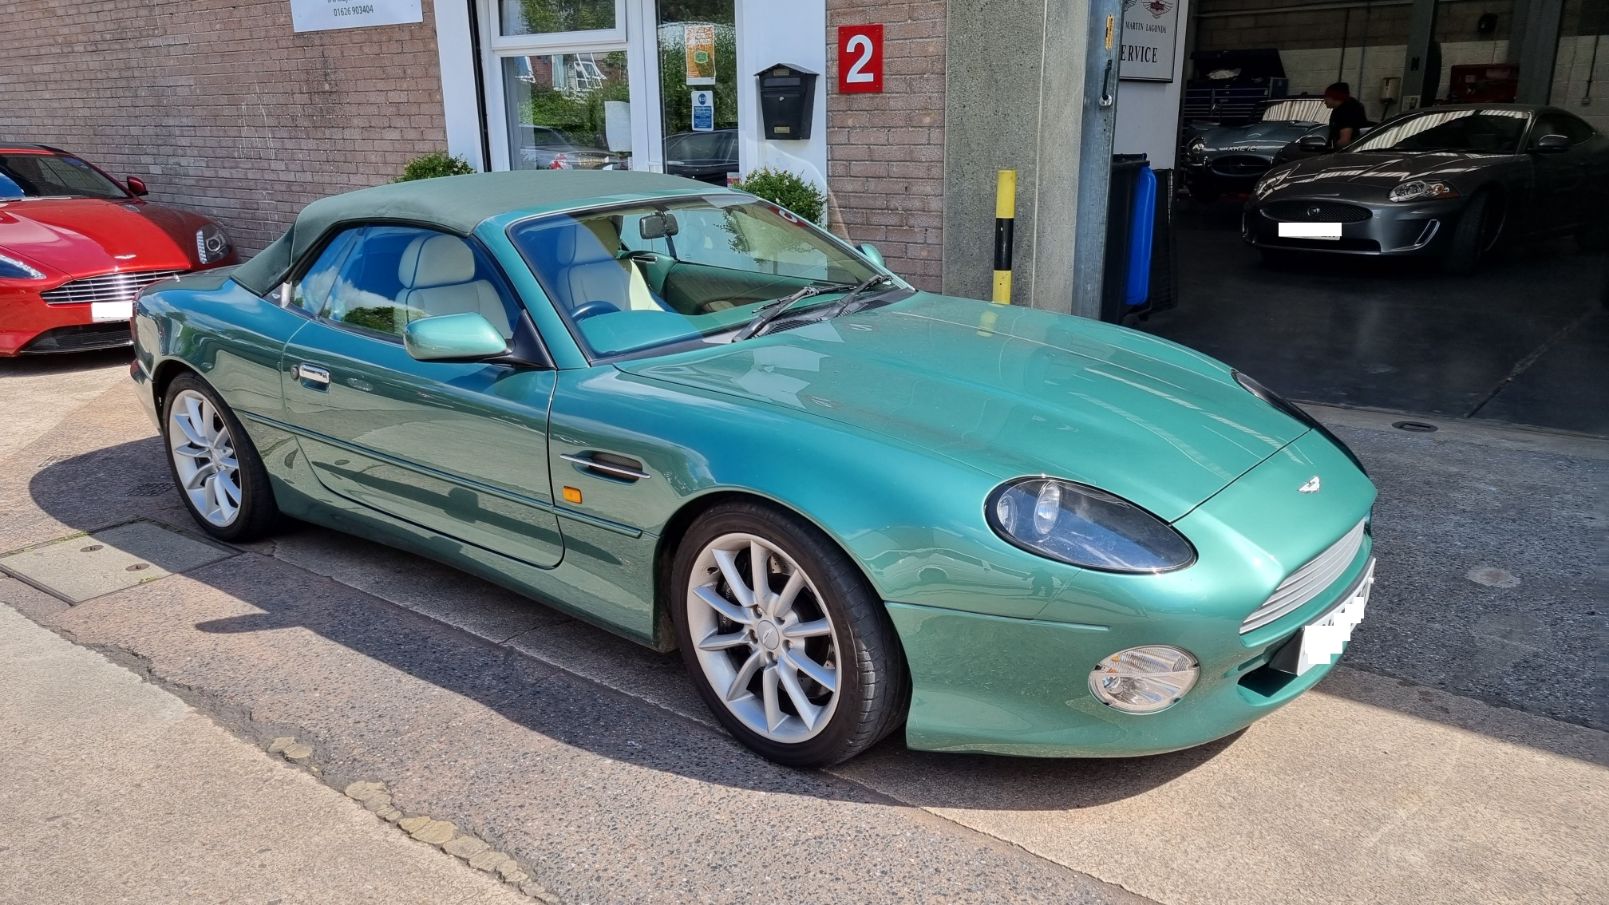 An exceptional example of a well looked-after Aston Martin DB7. 2001 Vantage Volante 6.0 V12  Finished in Aston Martin Racing Green with beige leather interior and a green convertible roof. Three owners from new and a full service history  Low mileage - 53,000 miles  MOT until November 2022 (no advisories) Drives like a new car  £35,000 ONO  Contact AJTECH for price and more details : - 01626 903404 or info@ajtech.co.uk